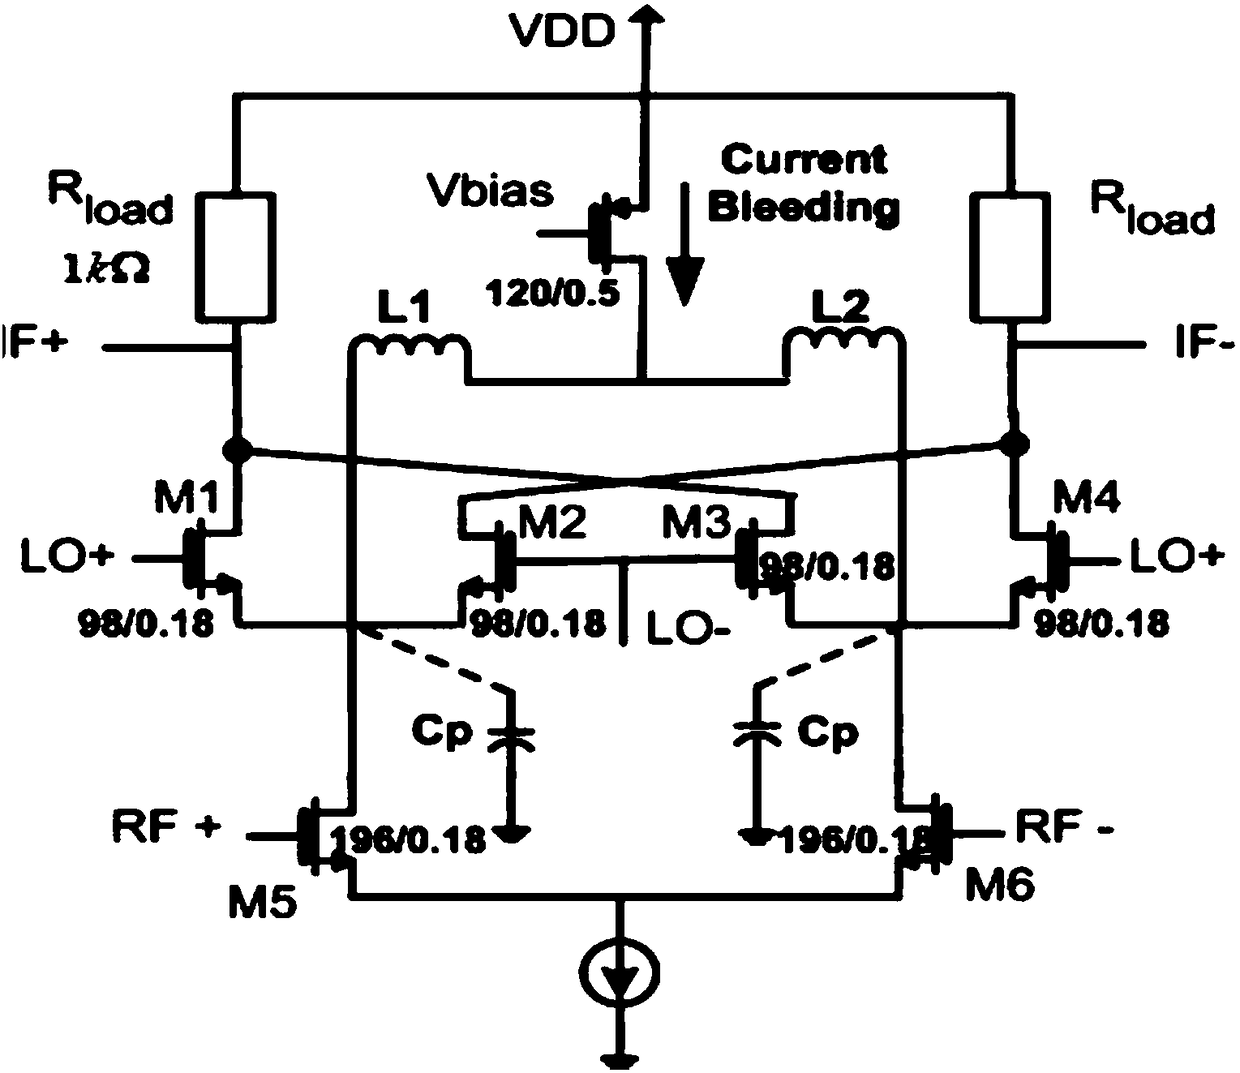 A Mixer Circuit with LO Phase Mismatch Compensation Function